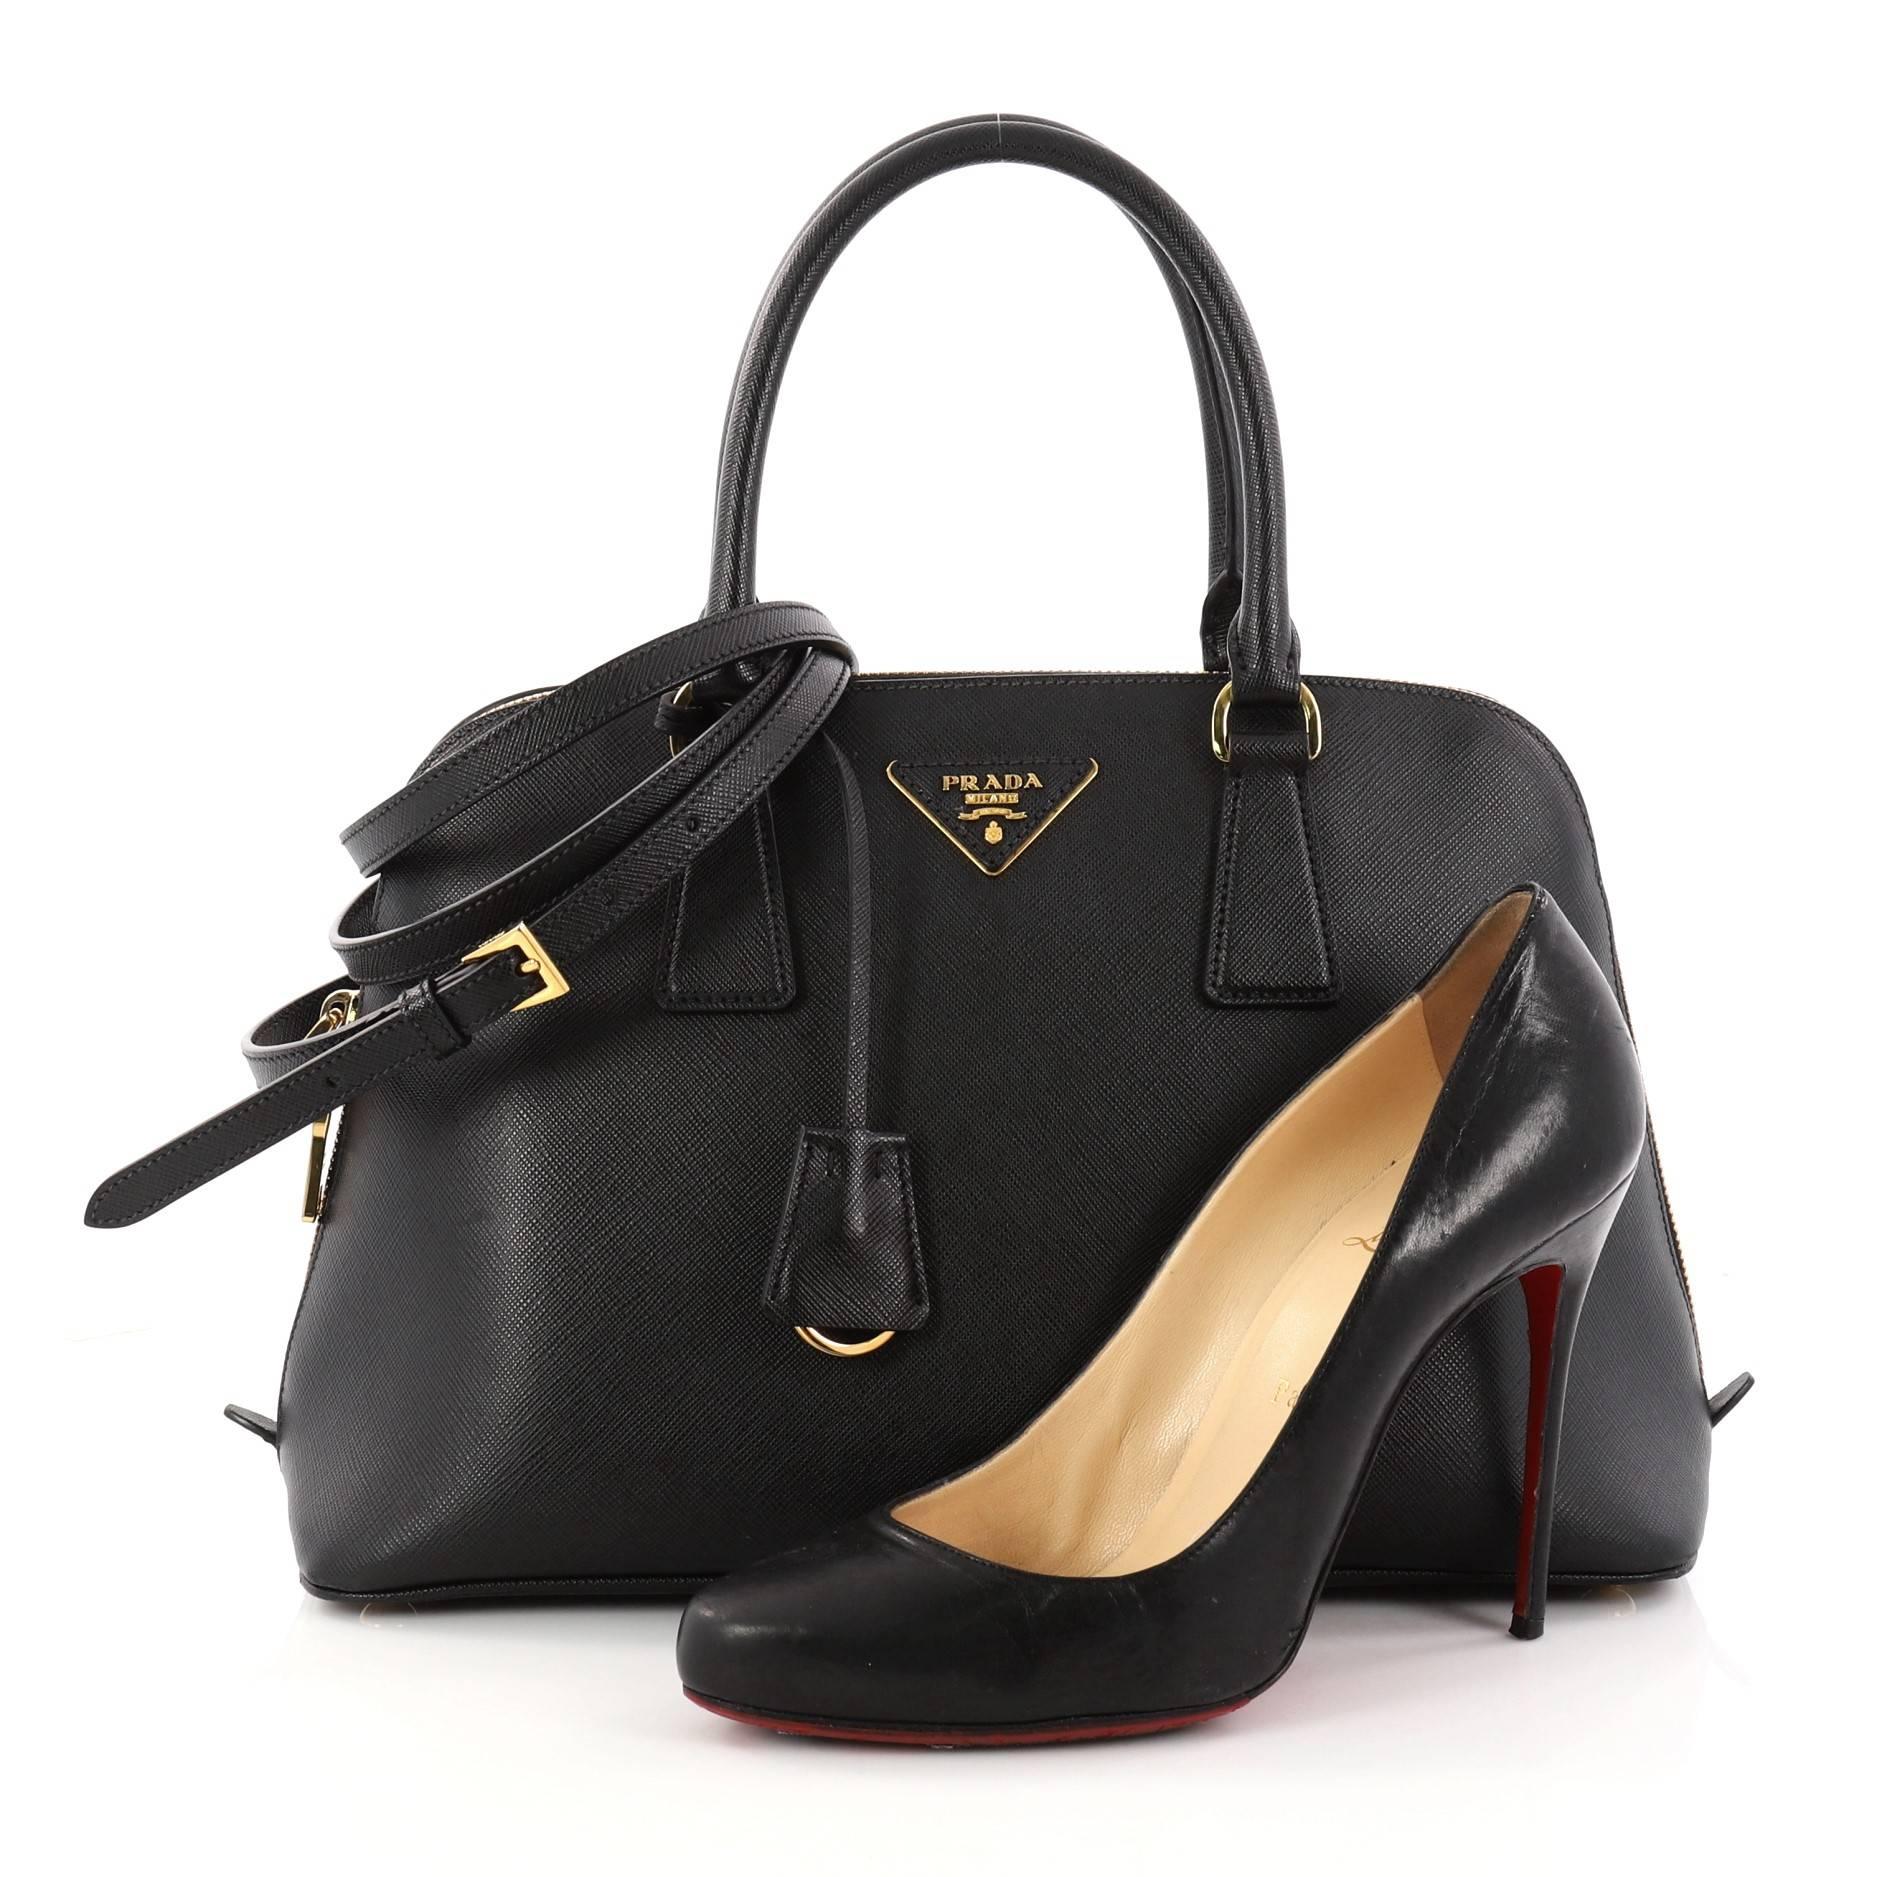 This authentic Prada Promenade Handbag Saffiano Leather Medium is elegant in its simplicity and structure. Crafted in black saffiano leather, this sleek dome-shaped satchel features dual-rolled handles, protective base studs, Prada logo at the